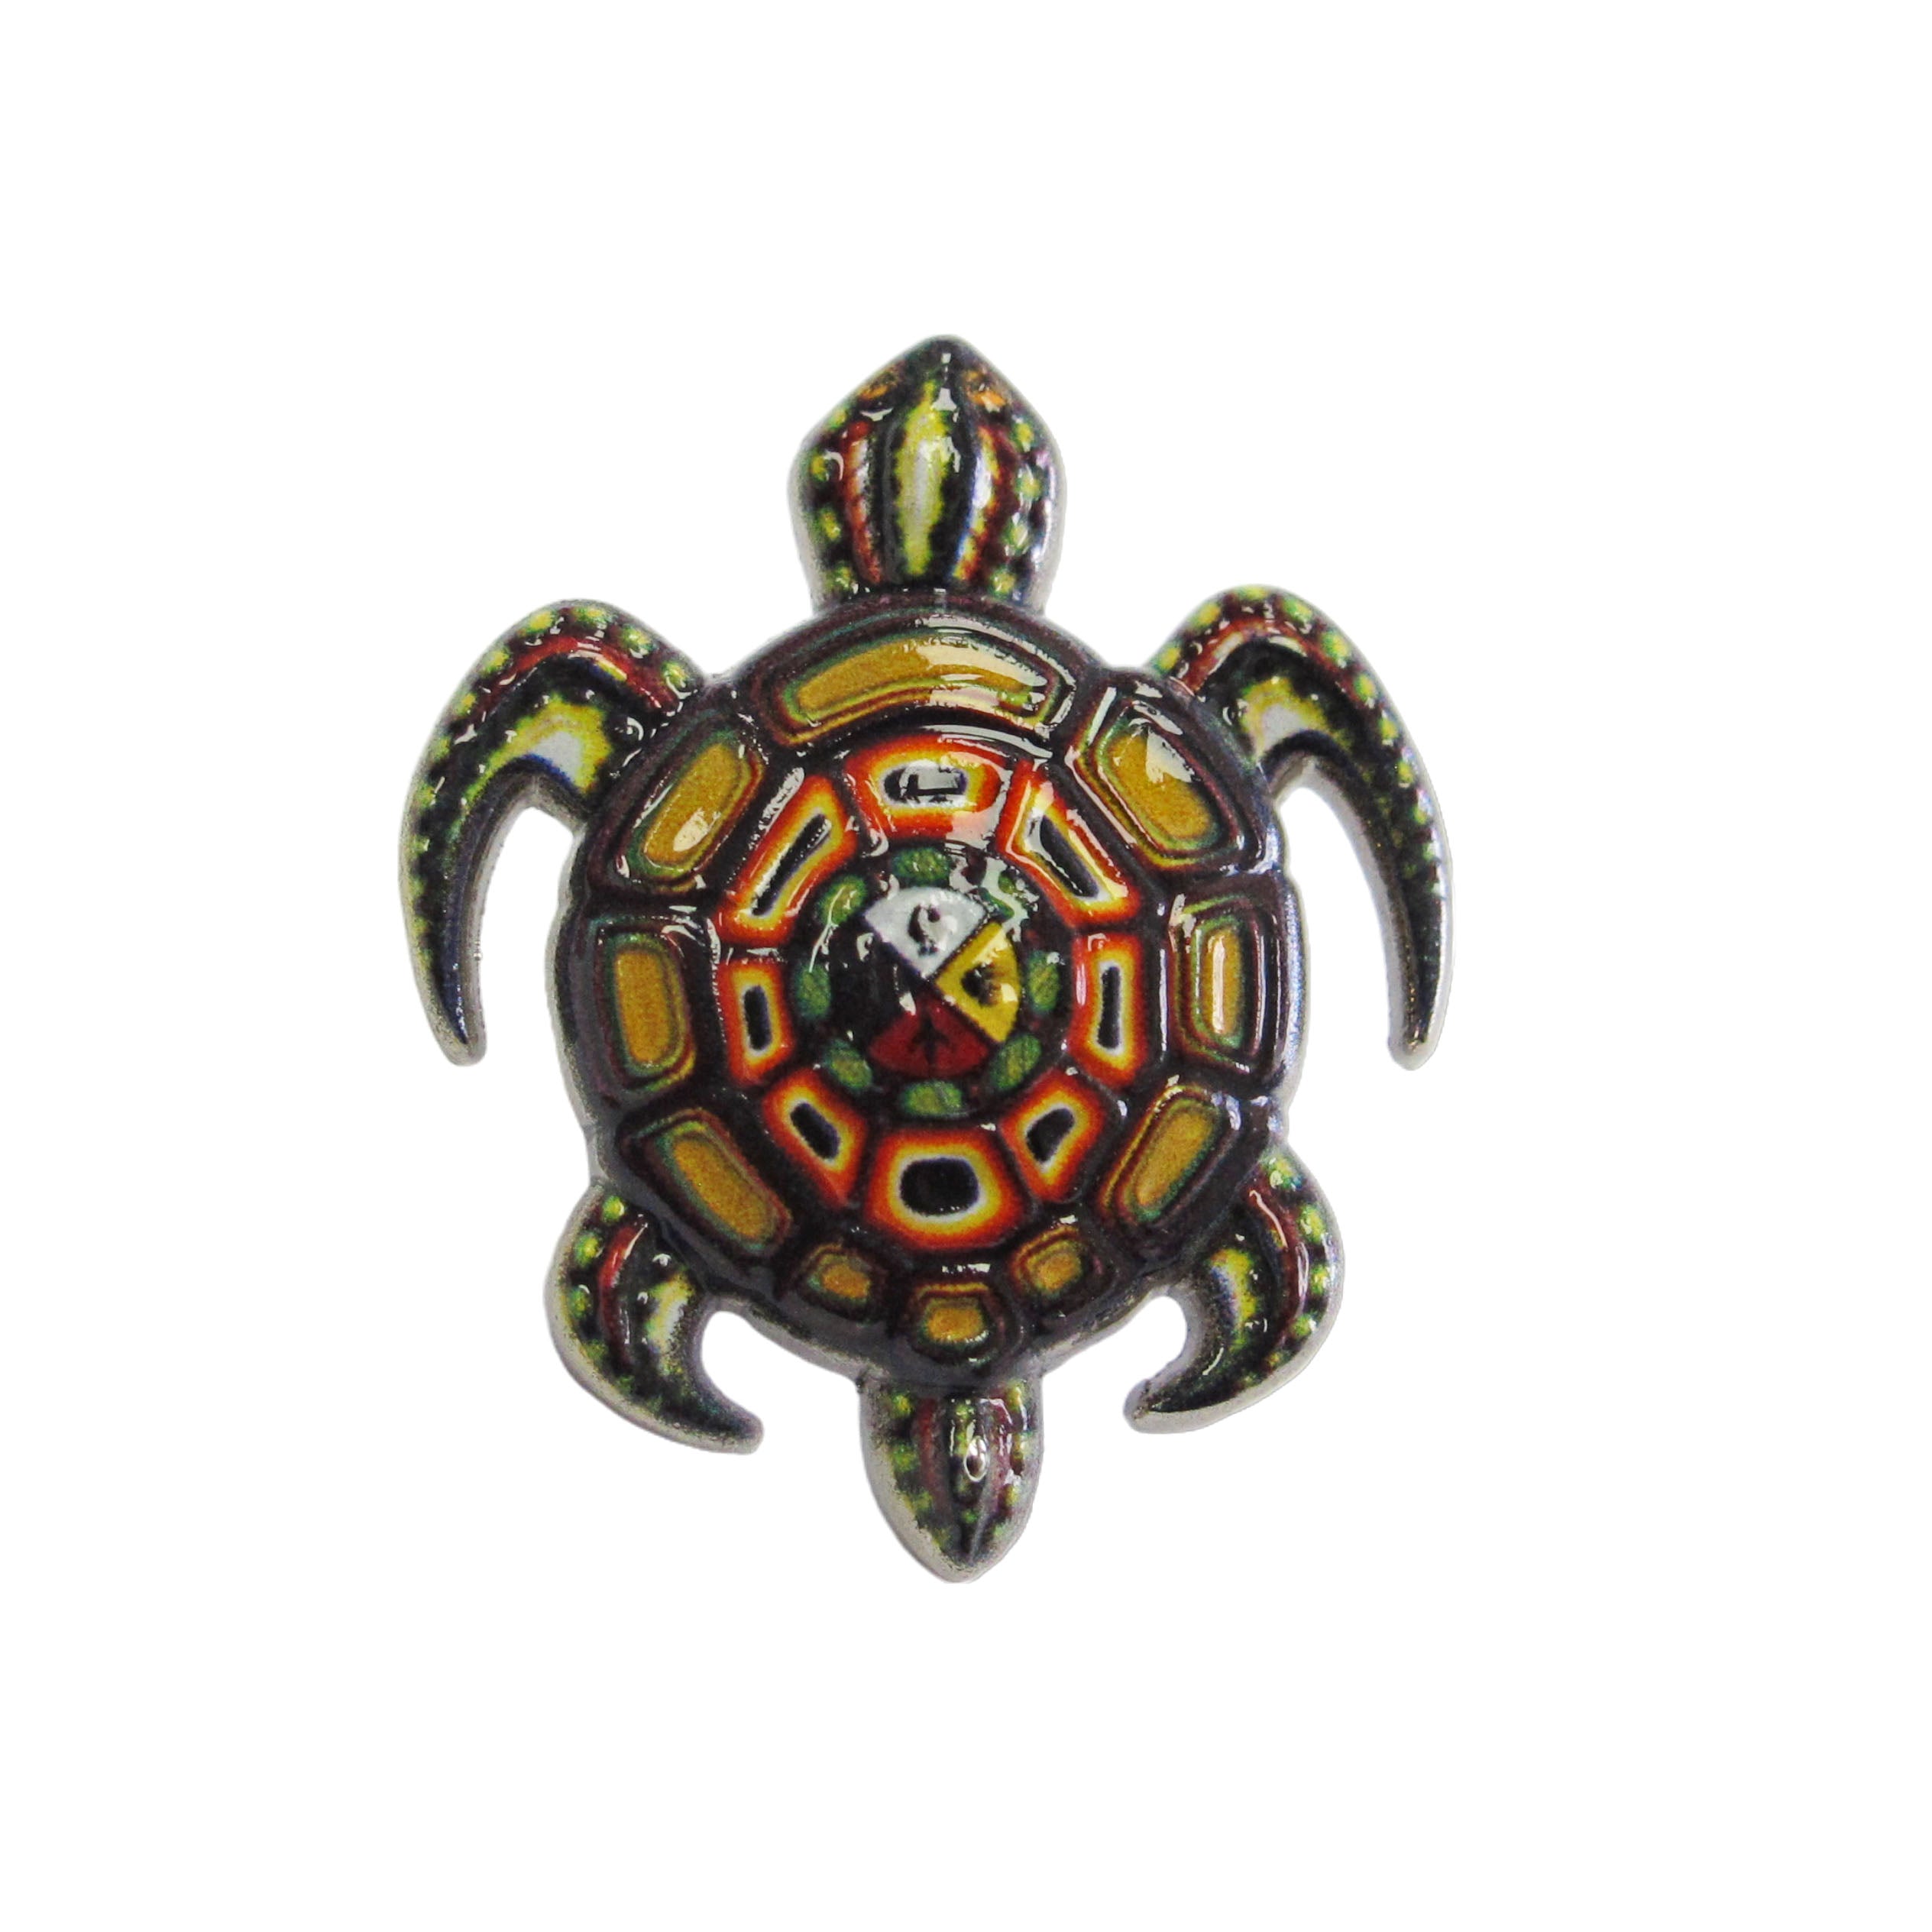 James Jacko Medicine Turtle Pin - Out of Stock